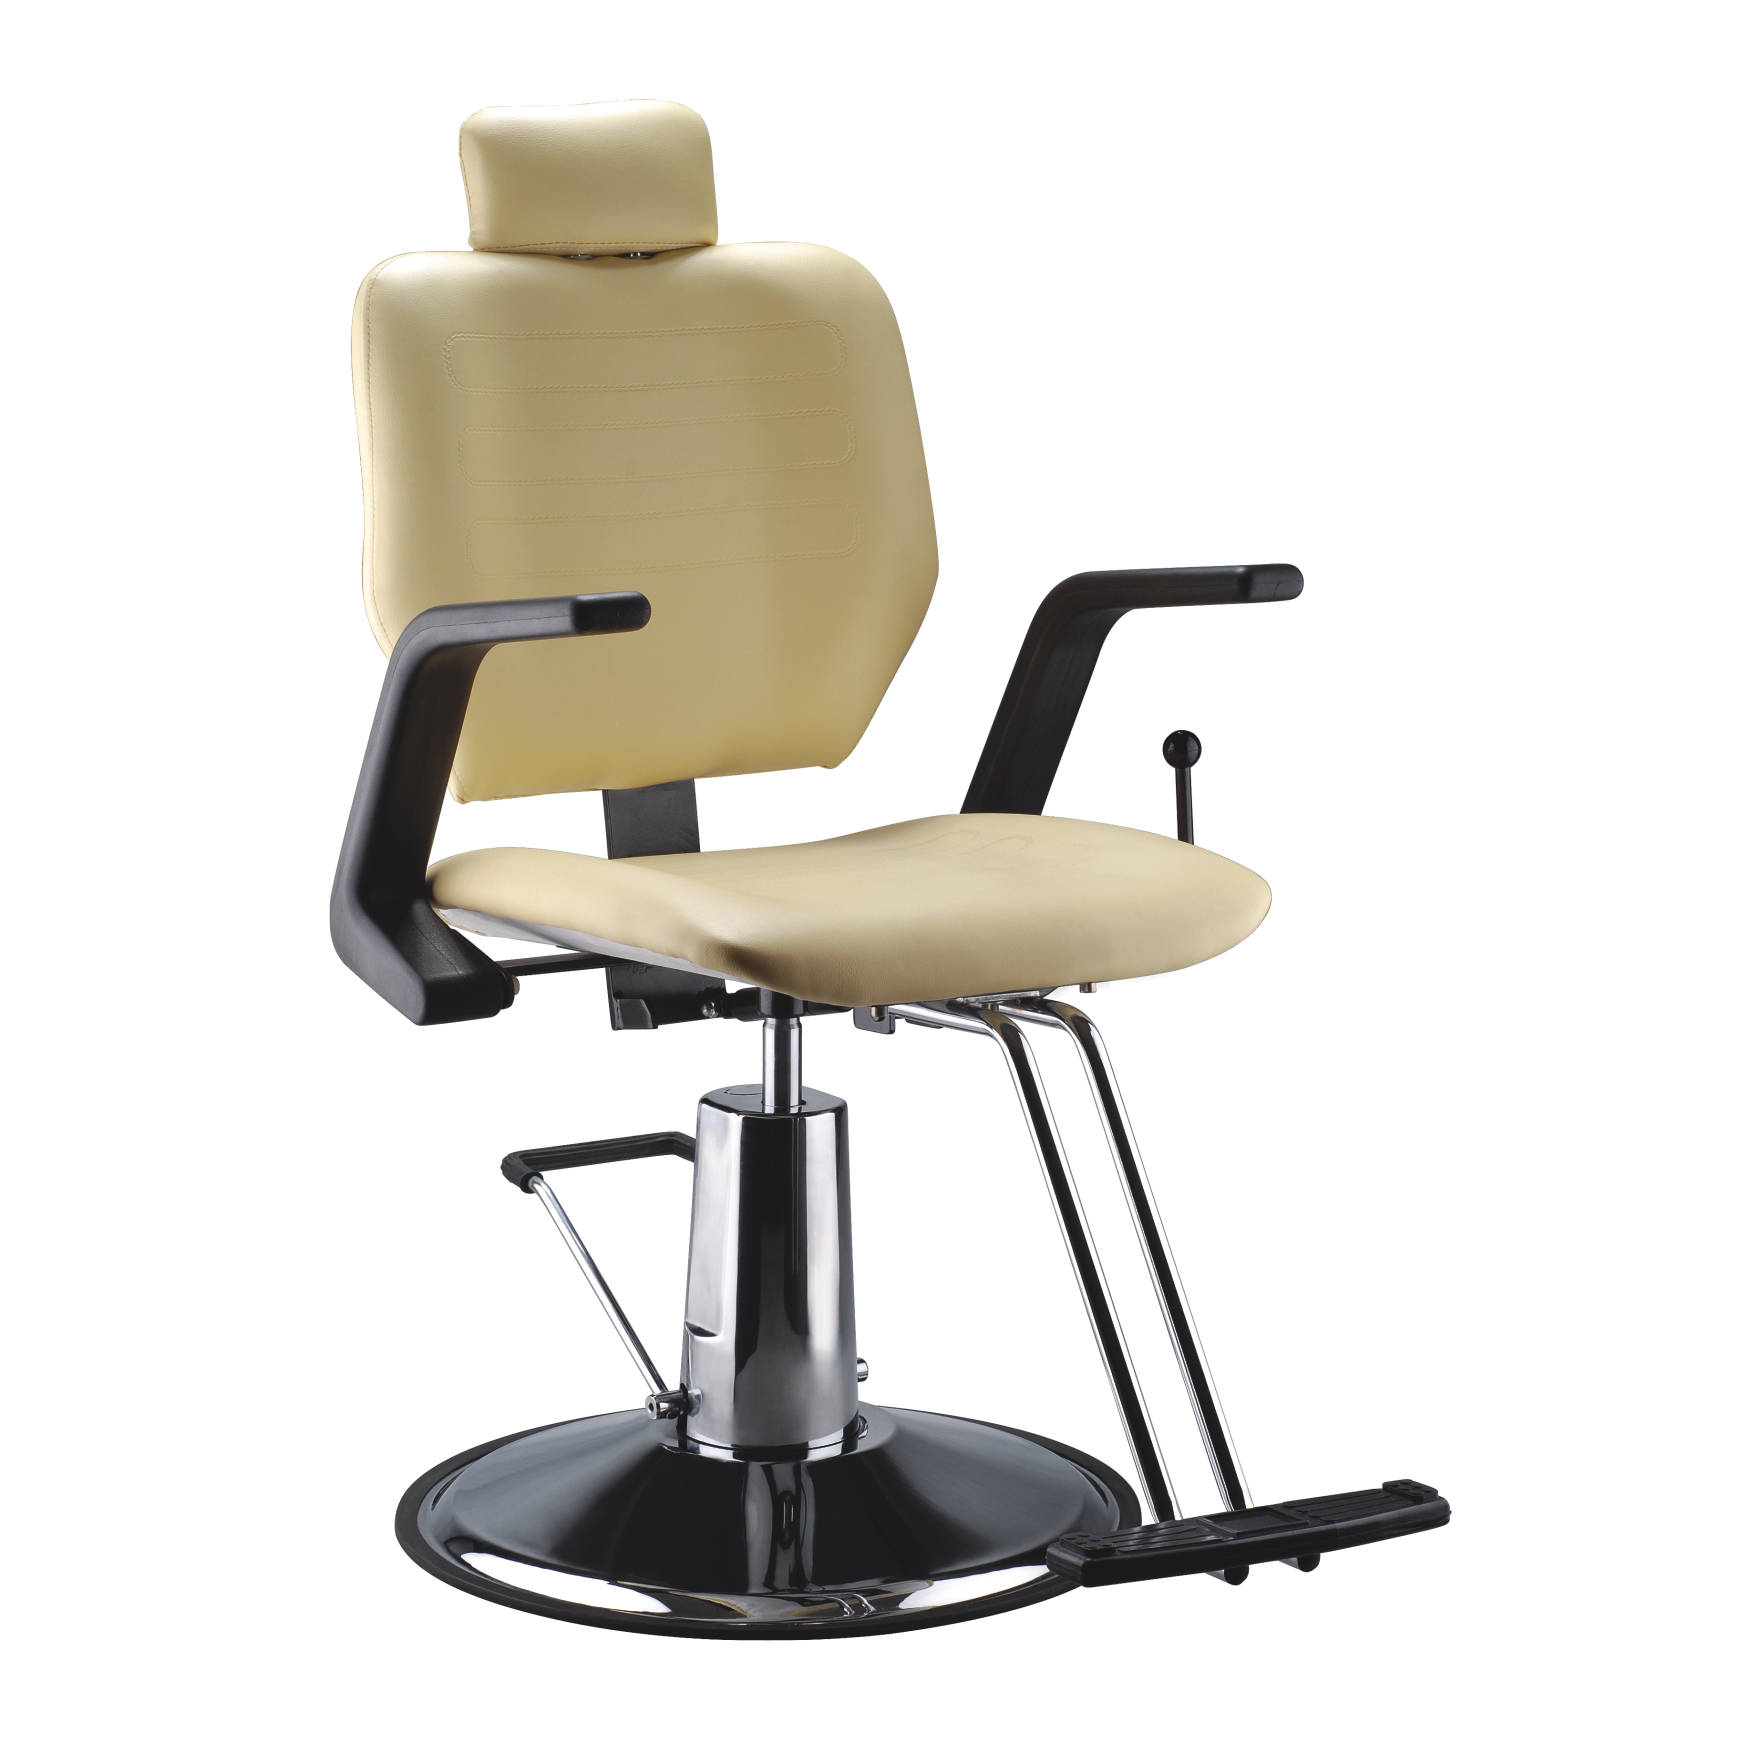 Buy Barber Chair Online at Best Price Rs. 30000 in Pakistan 